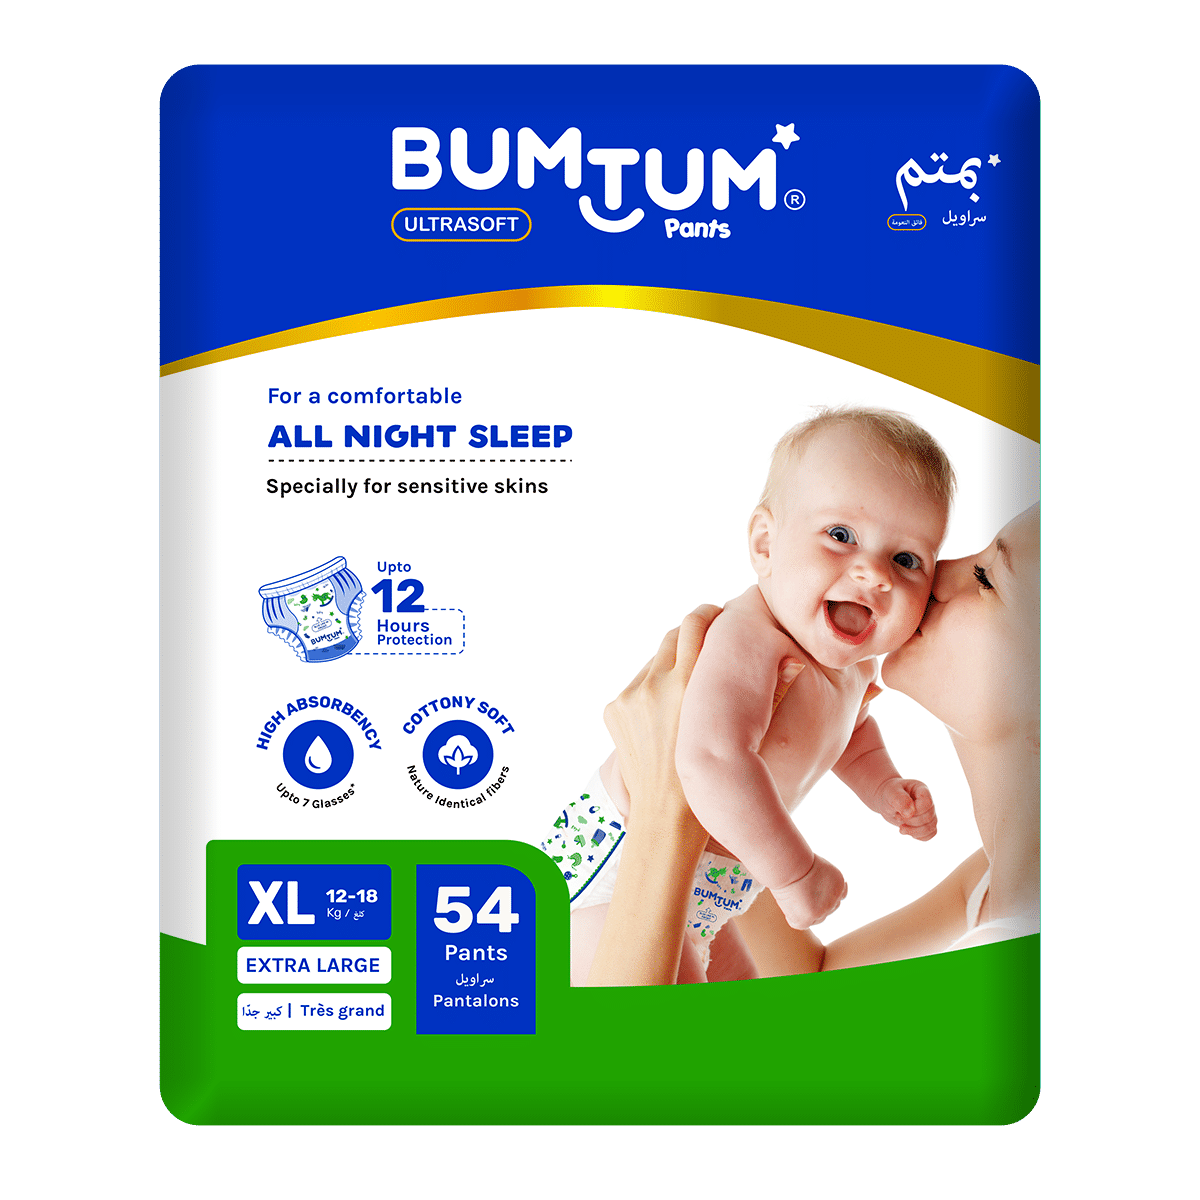 Himalaya Total Care Baby Pants Extra Large Buy Himalaya Total Care Baby Pants  Extra Large Online at Best Price in India  Nykaa